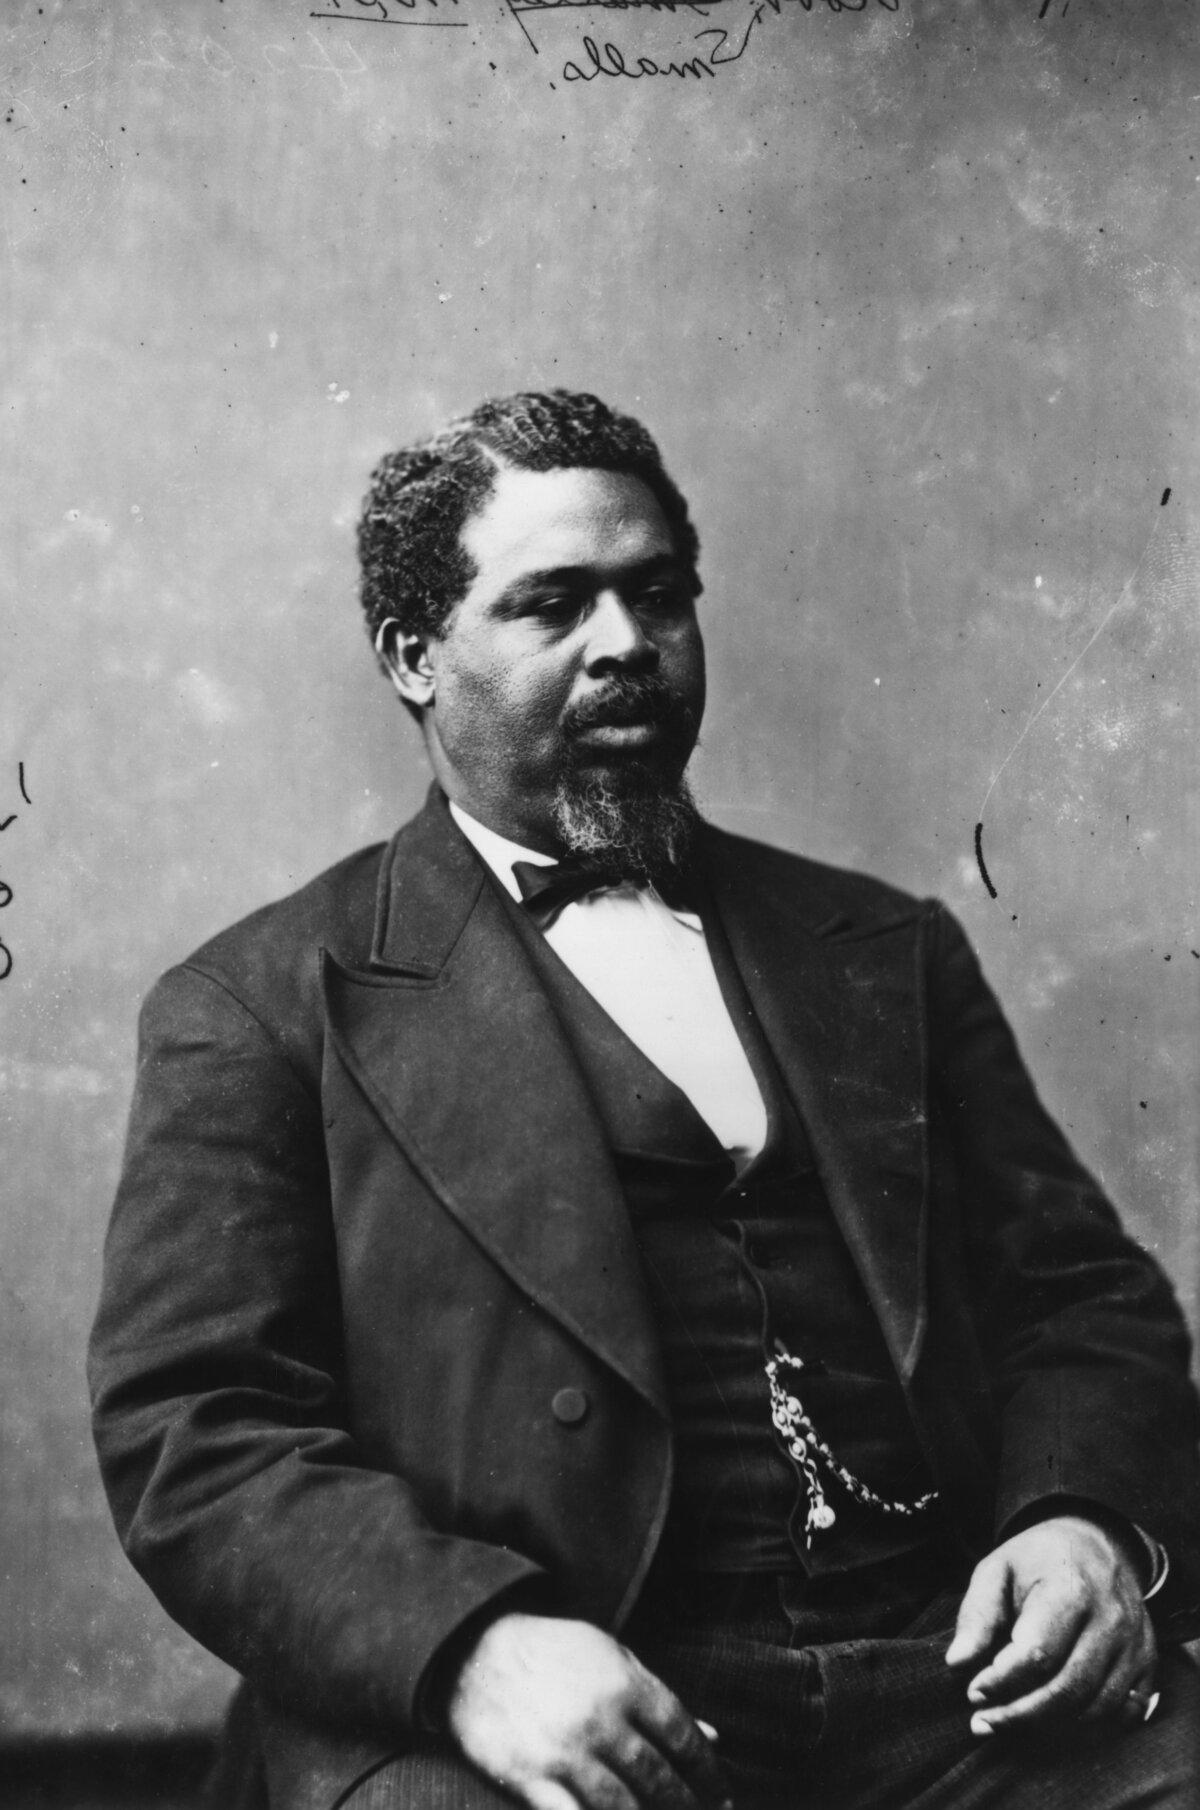 Robert Smalls (1839–1915) was born a slave in South Carolina and later served as a congressman for the state. (MPI/Getty Images)